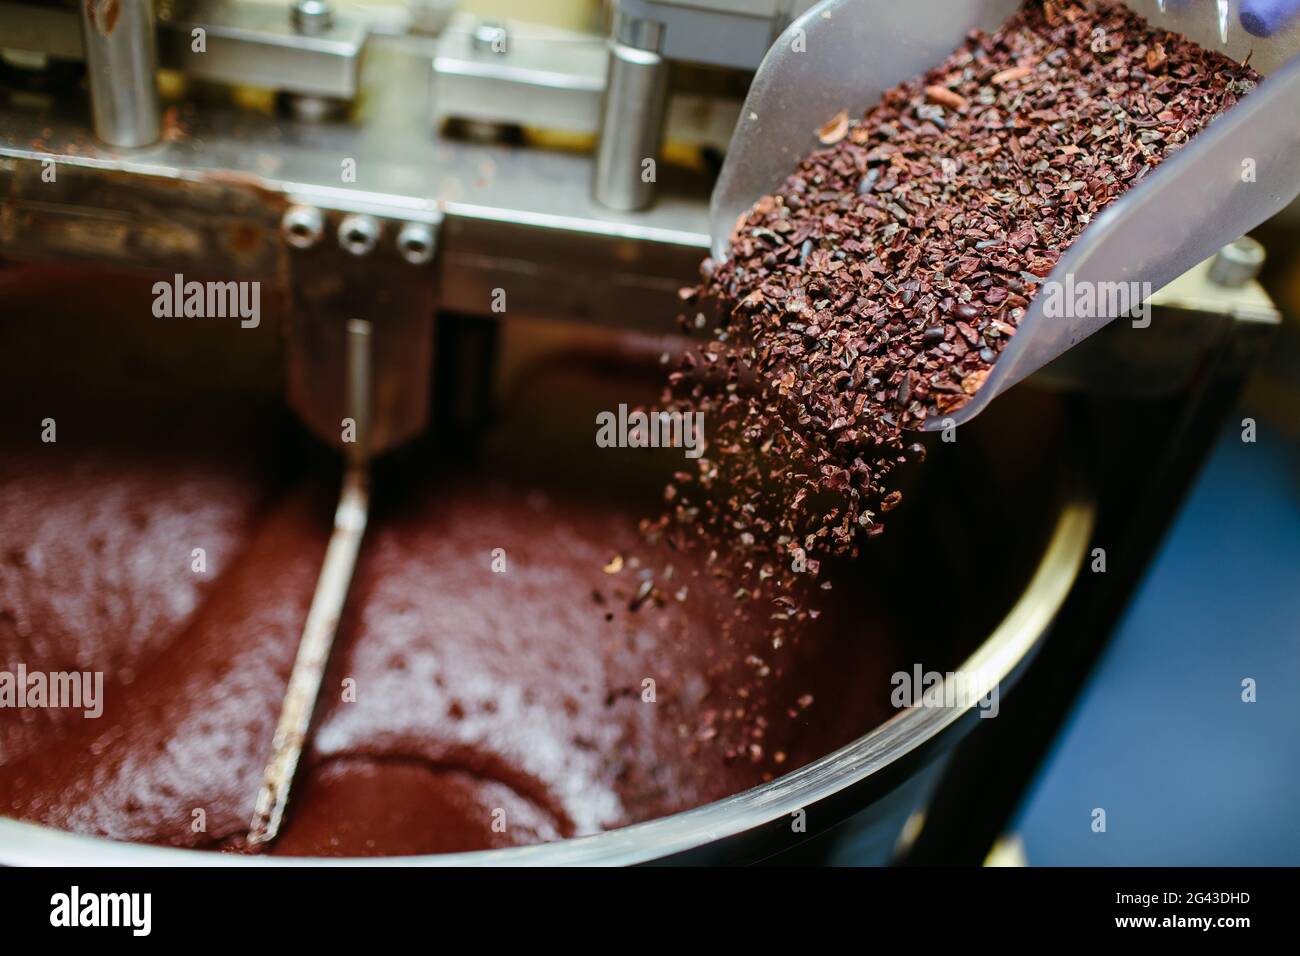 https://c8.alamy.com/comp/2G43DHD/artisan-chocolate-making-adding-cocoa-grits-in-the-melanger-stone-grinder-2G43DHD.jpg